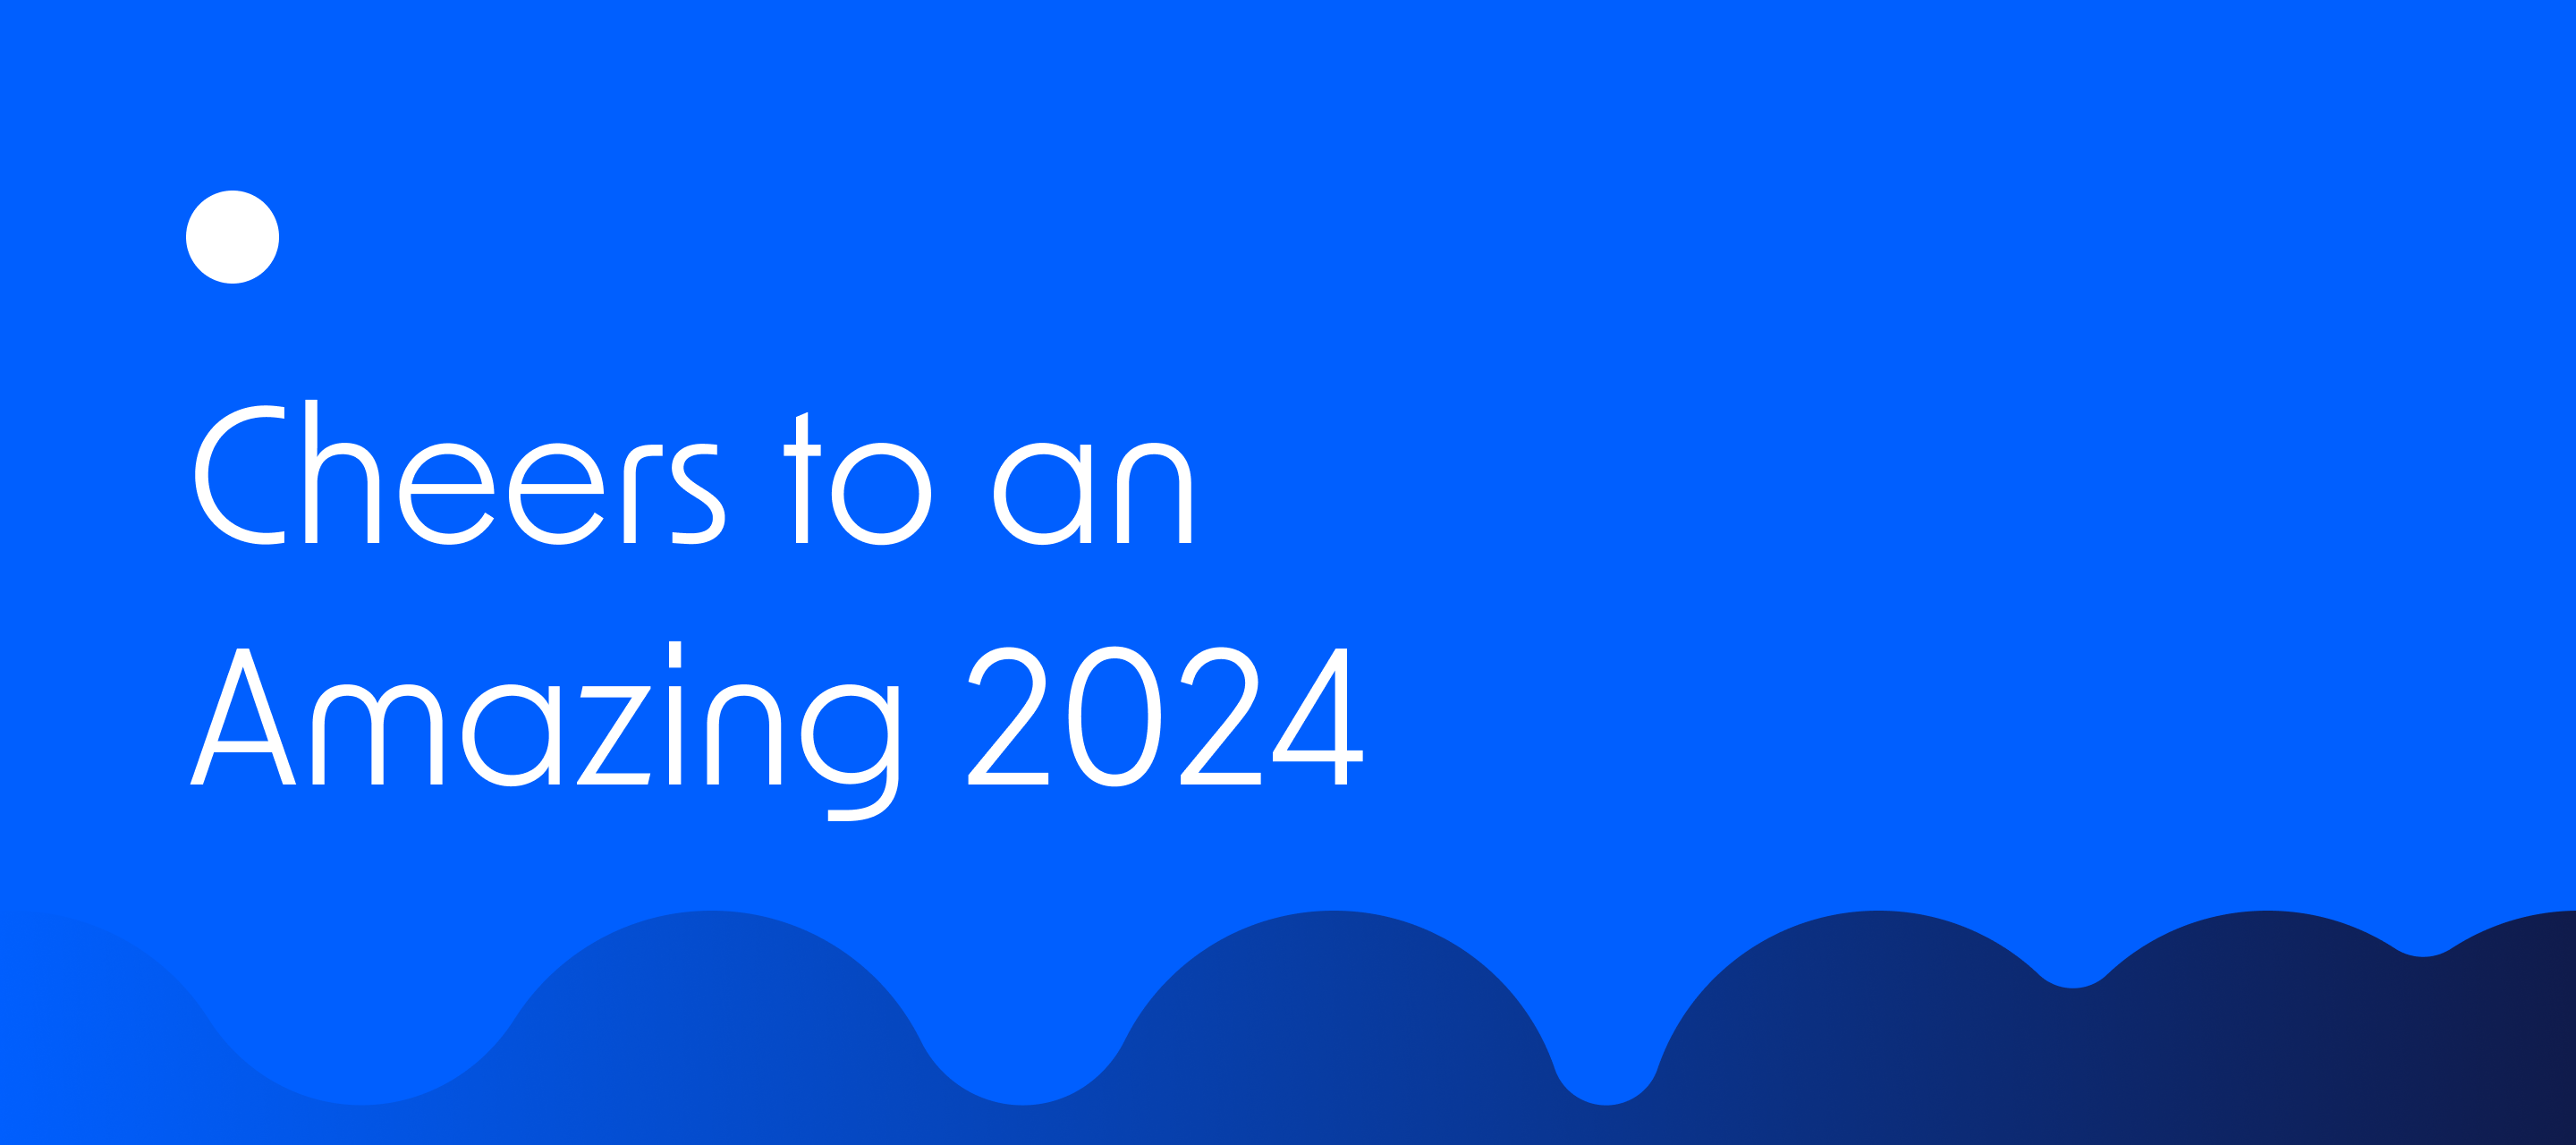 🎁 Cheers to an Amazing 2024: How we can level up together